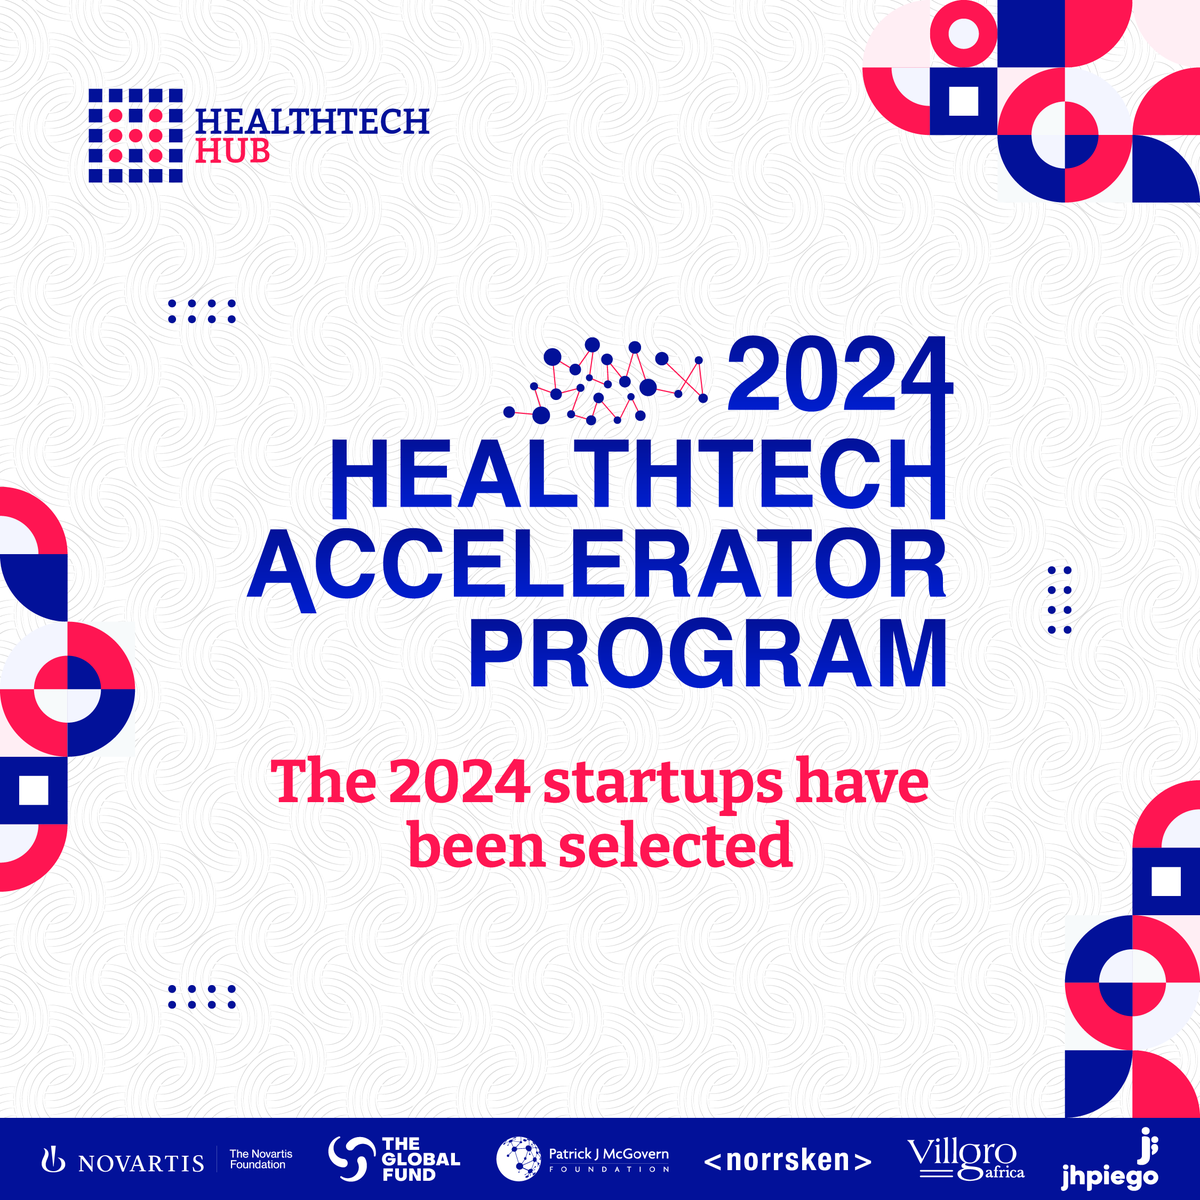 We are delighted to announce the successful culmination of our rigorous selection process for our 2024 Accelerator Program where 31 ventures have secured a spot in the cohort. Follow our channels for the latest updates. #HealthTechHubAfrica #AfricanStartups #AcceleratorProgram